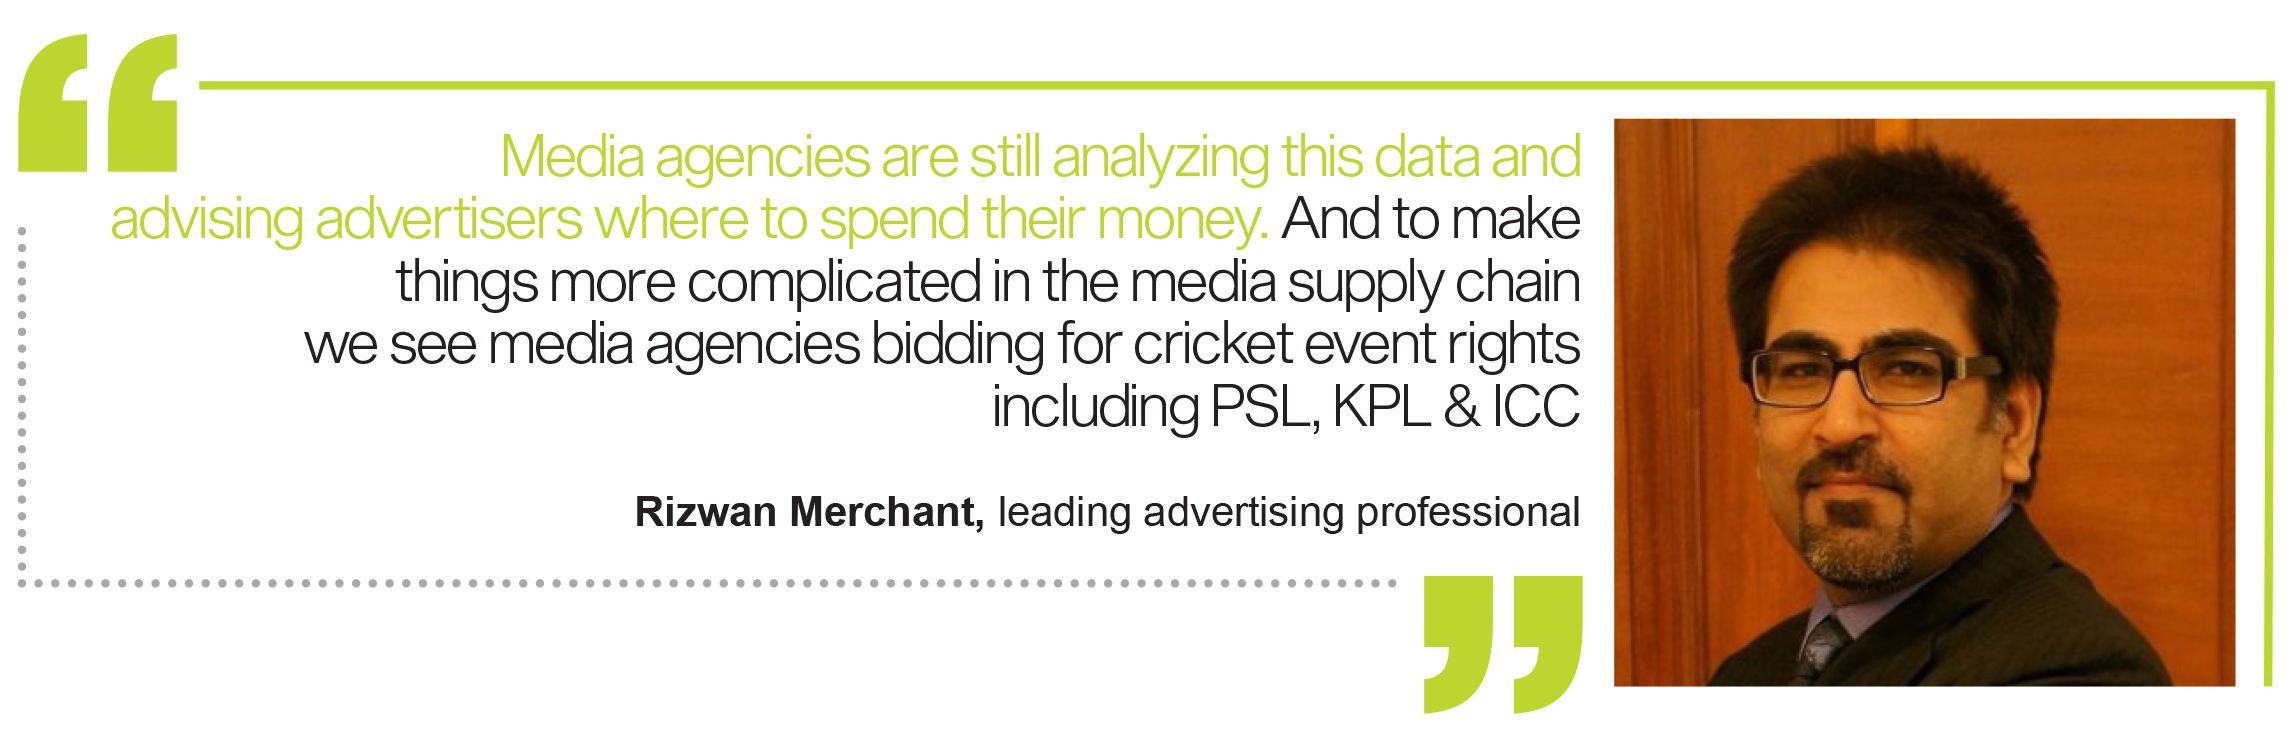 How could the PCB justify pricing the PSL media rights at $100 million?